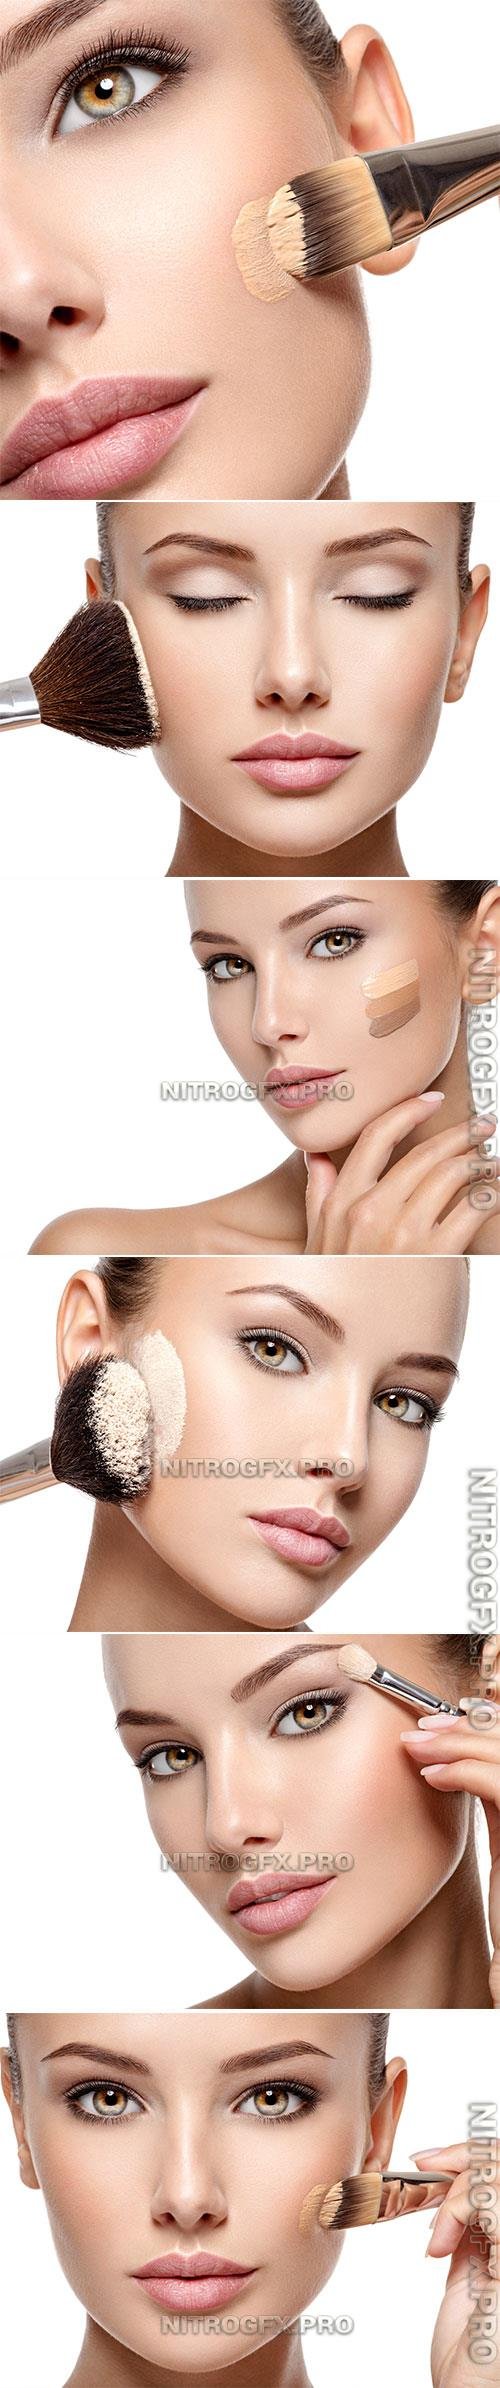 Makeup And Beautiful Female Face